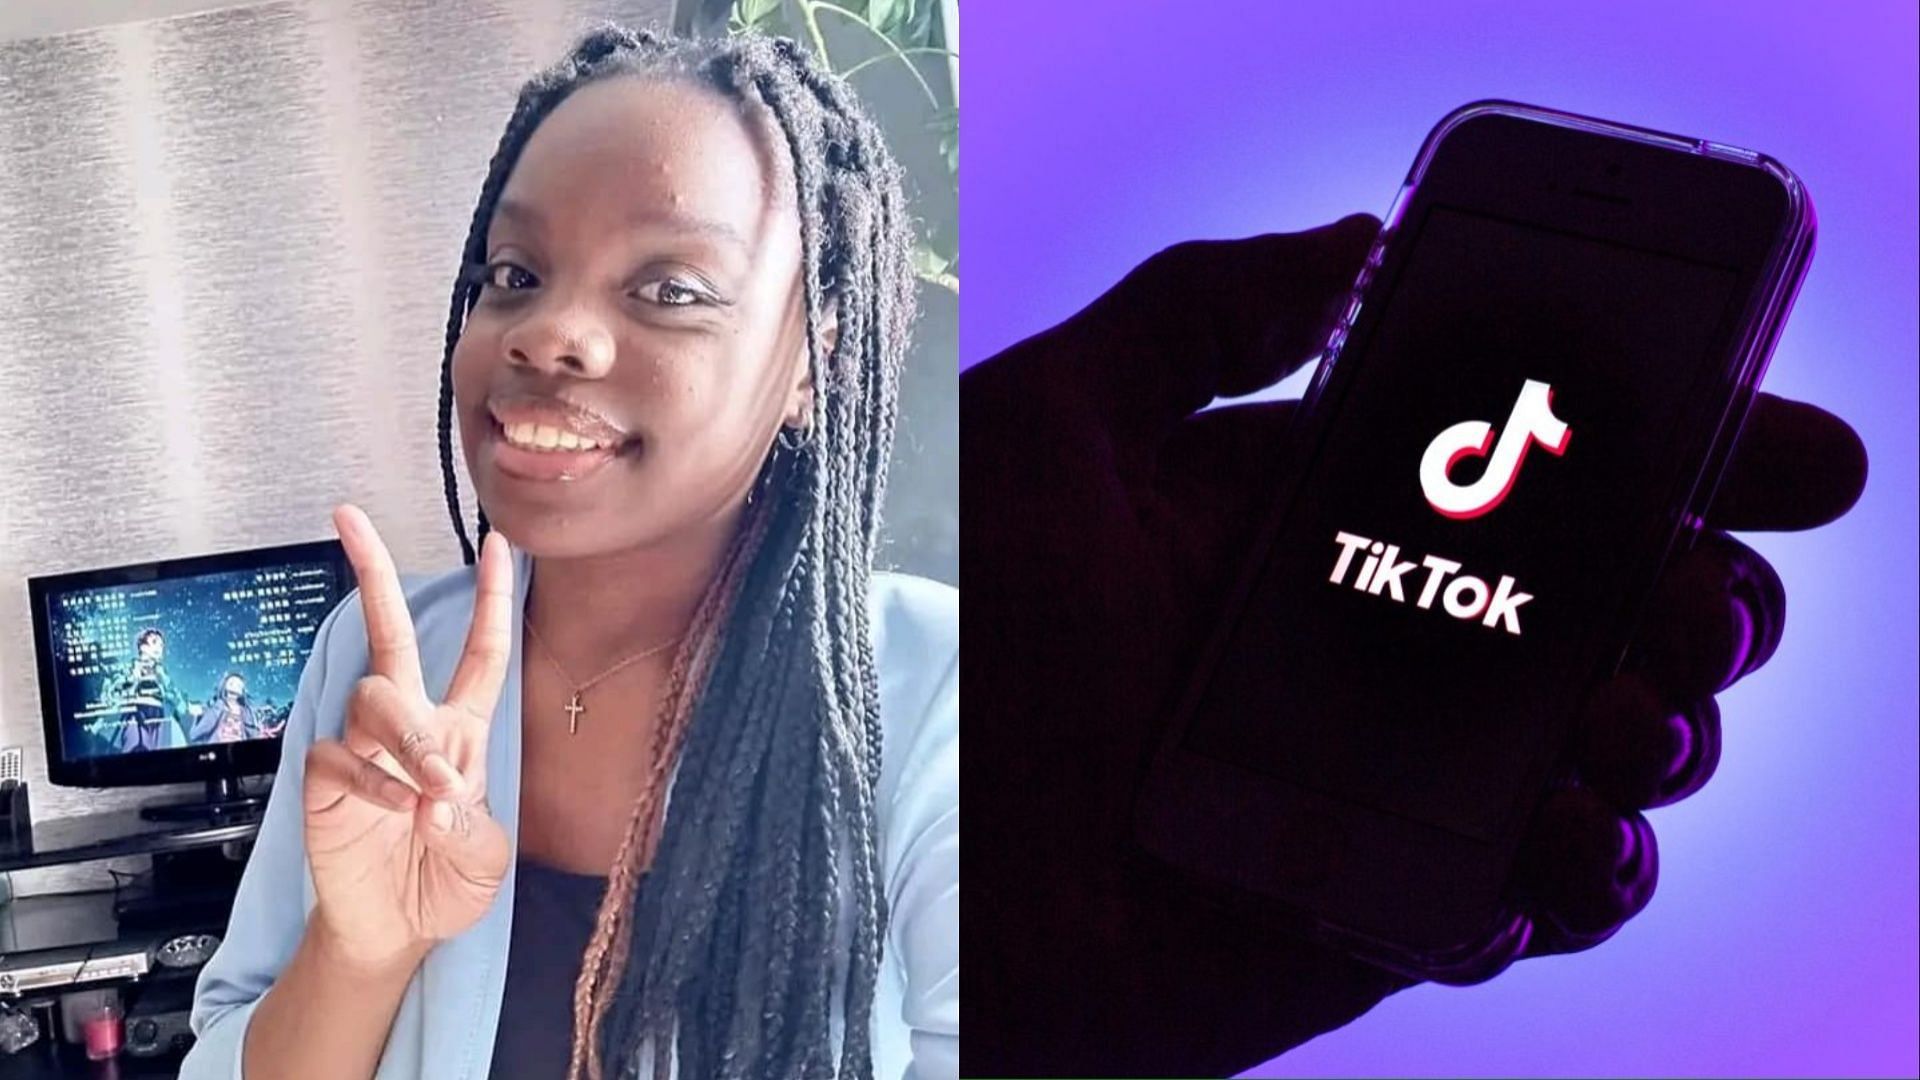 16-year-old girl dies in France after attempting deadly TikTok scarf challenge. (Image via Facebook/Africulture, Shutterstock)